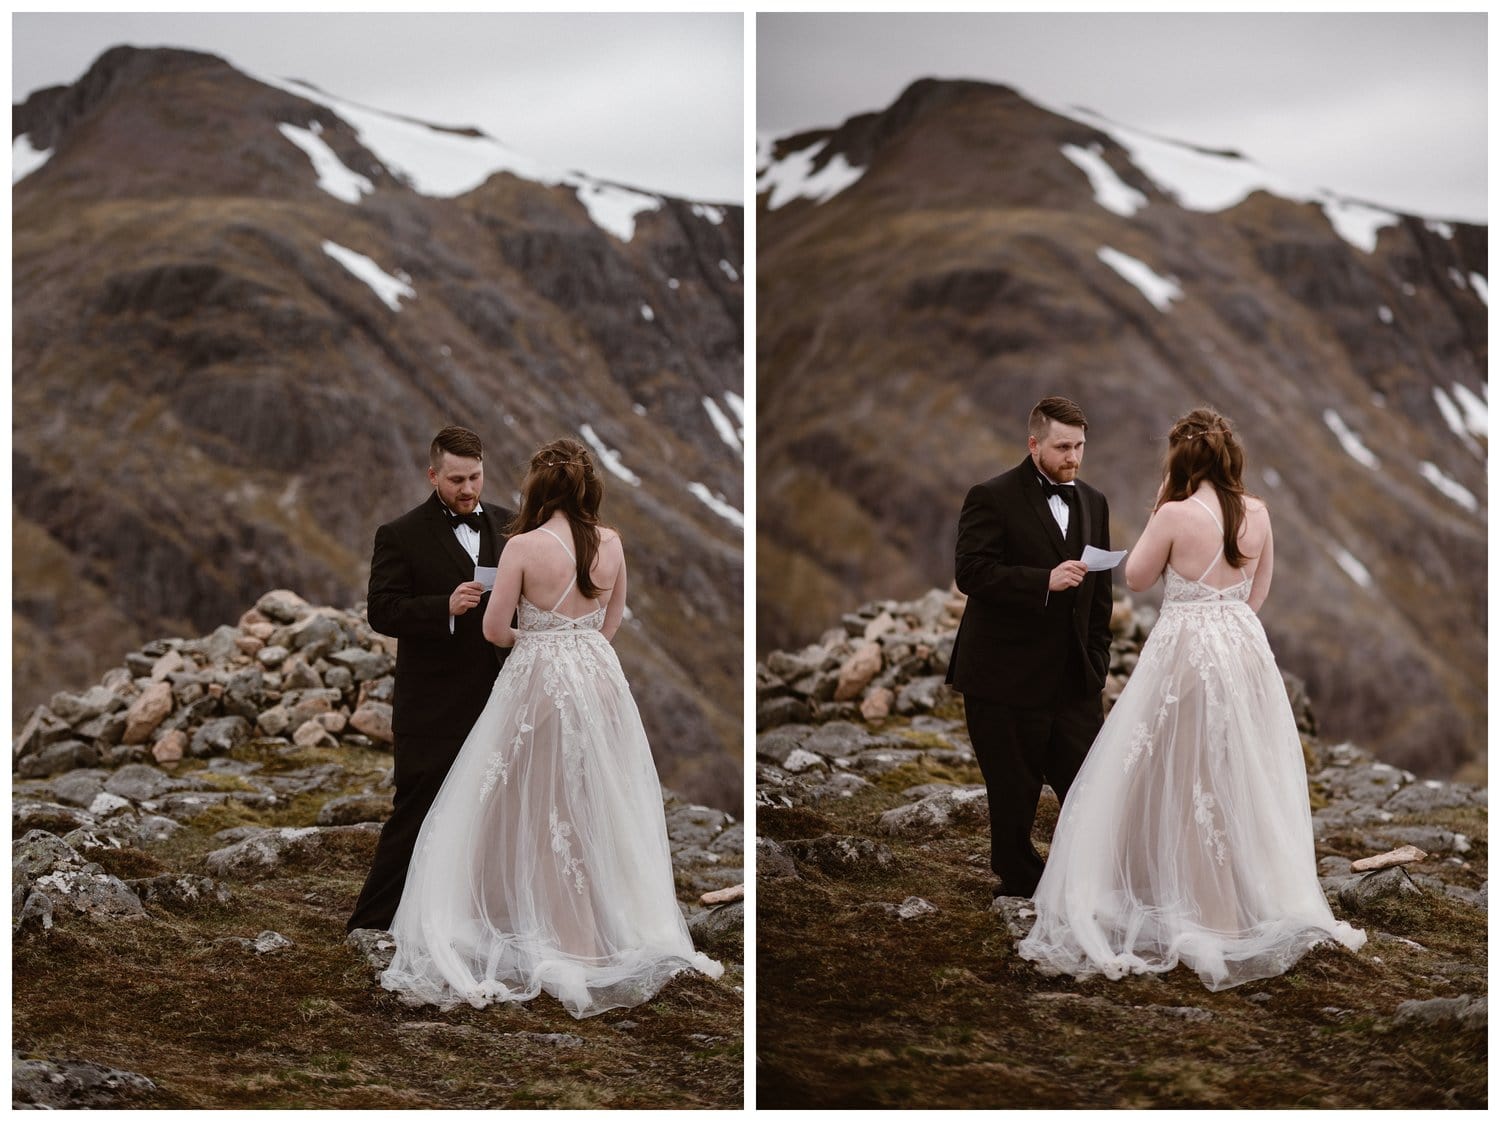 Bride and groom read their vows in front of Glencoe Mountain in the Scottish Highlands.